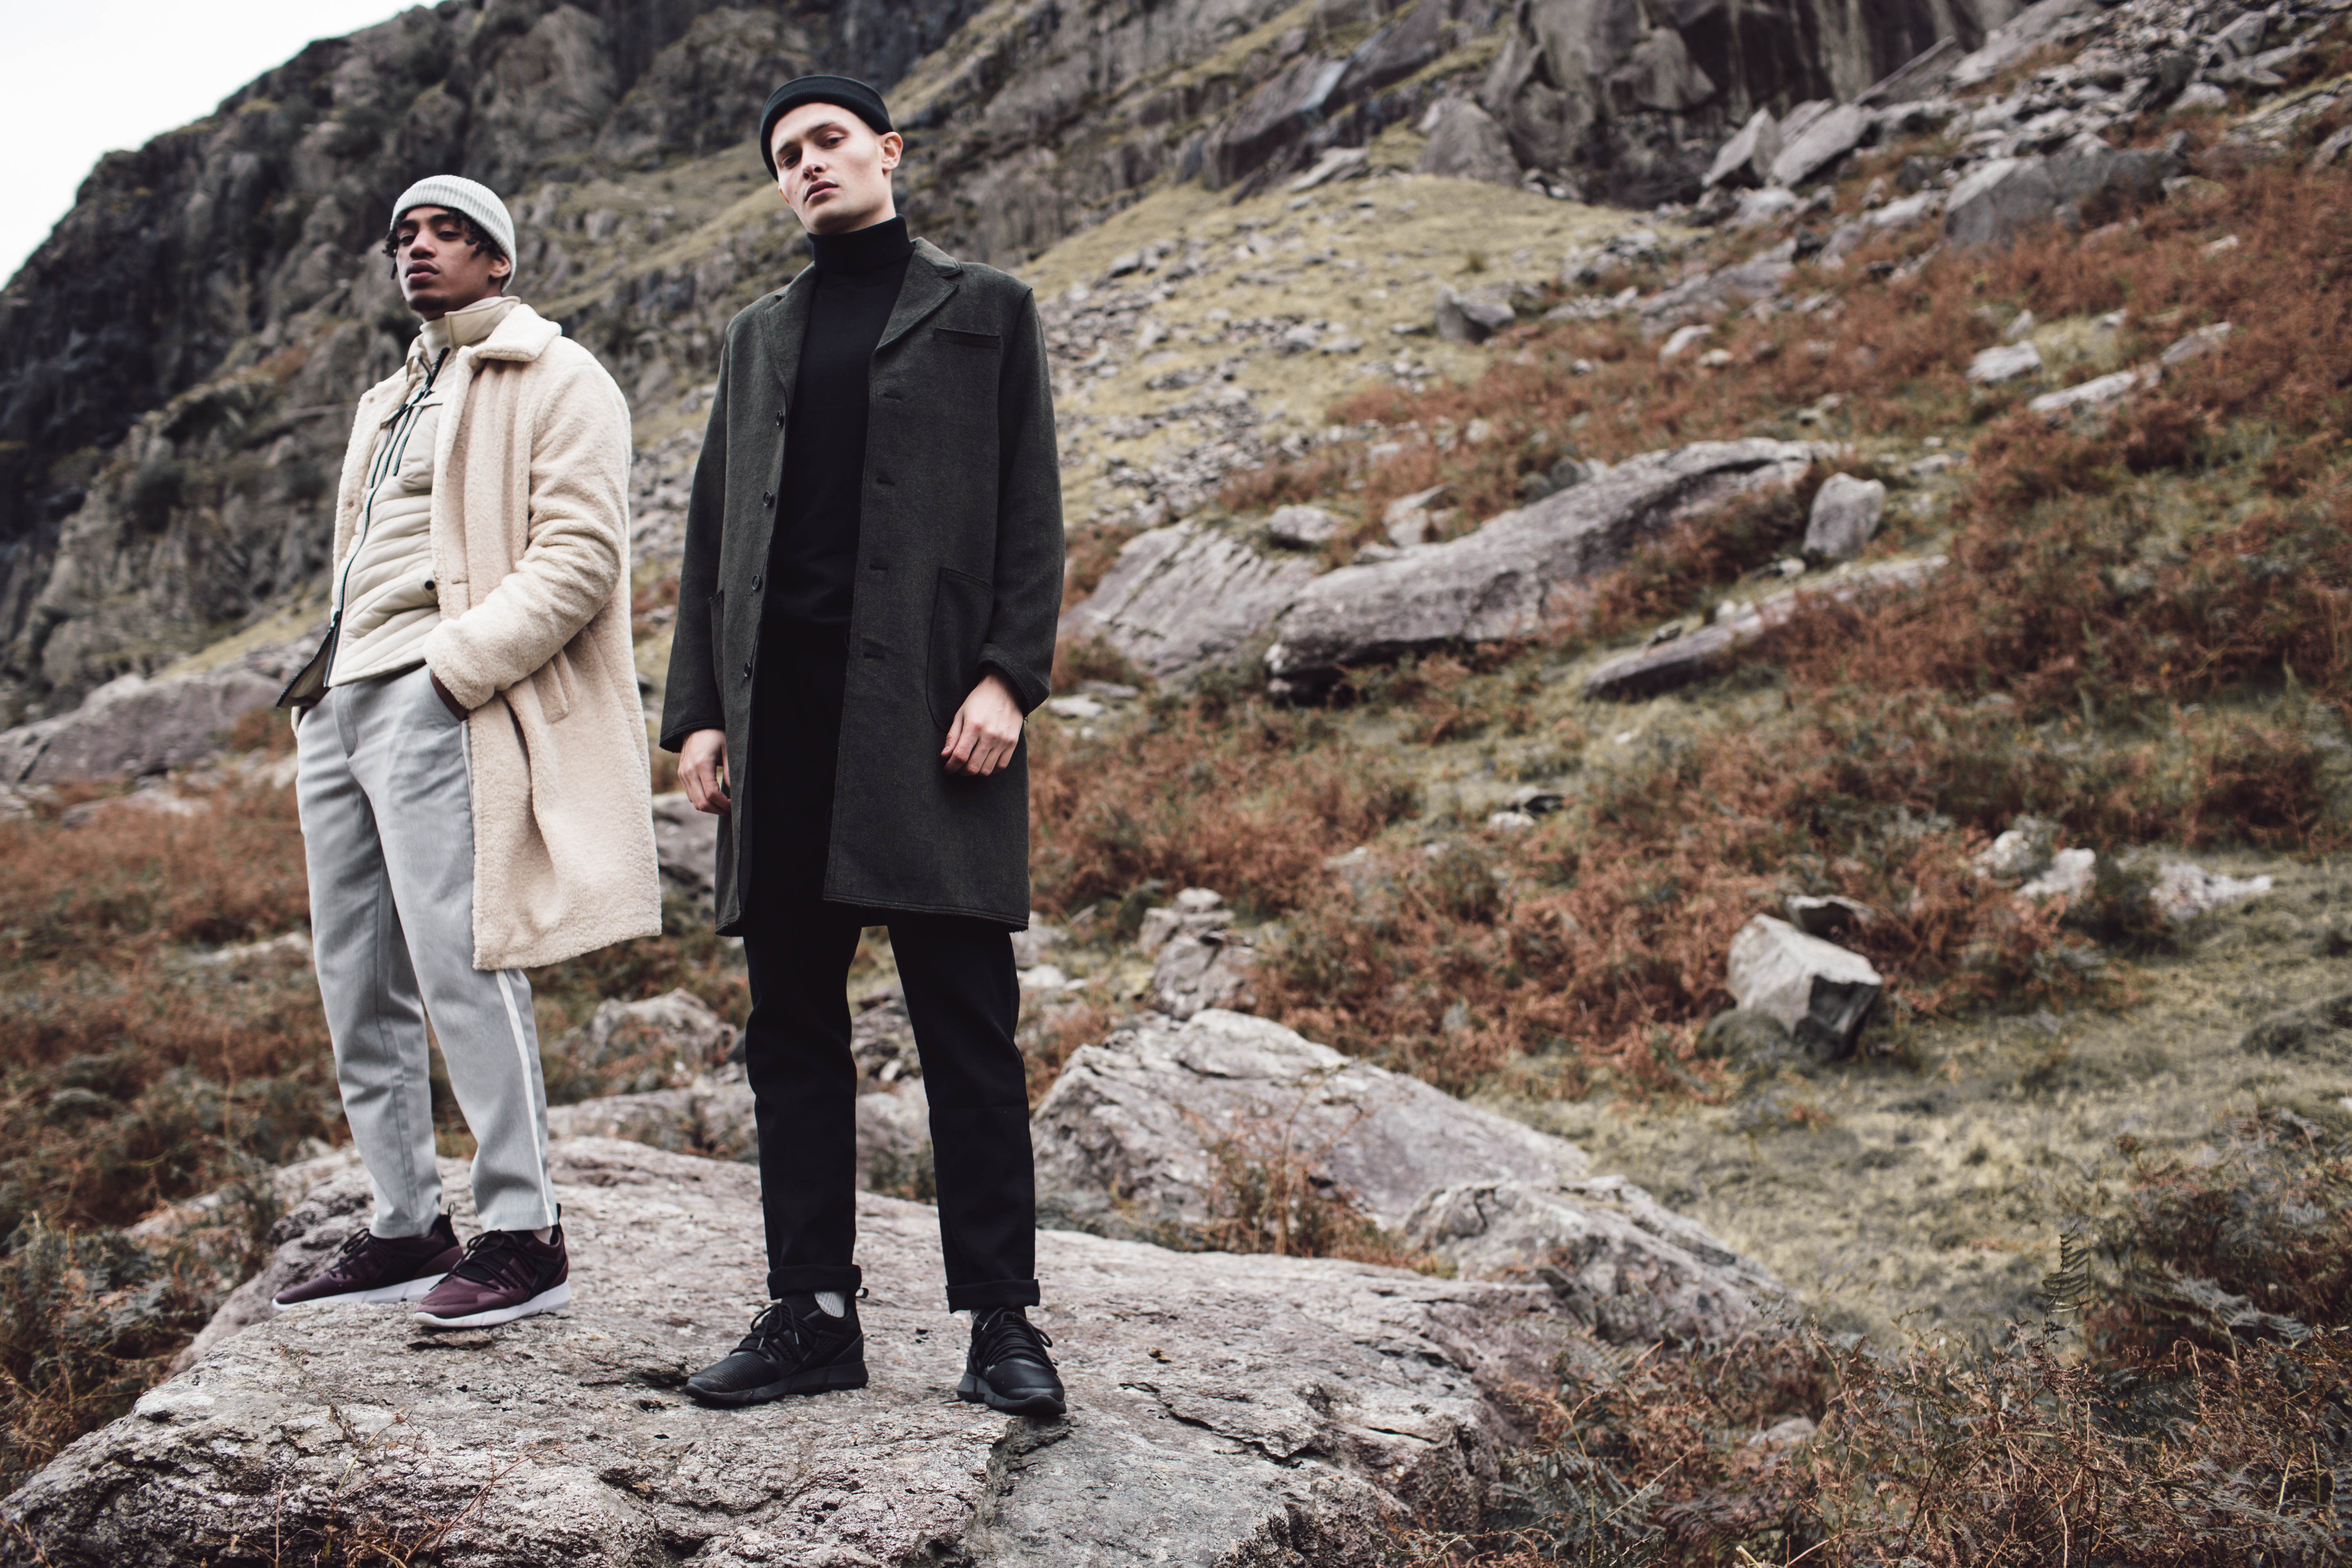 Cortica Drop Their Ascent Collection